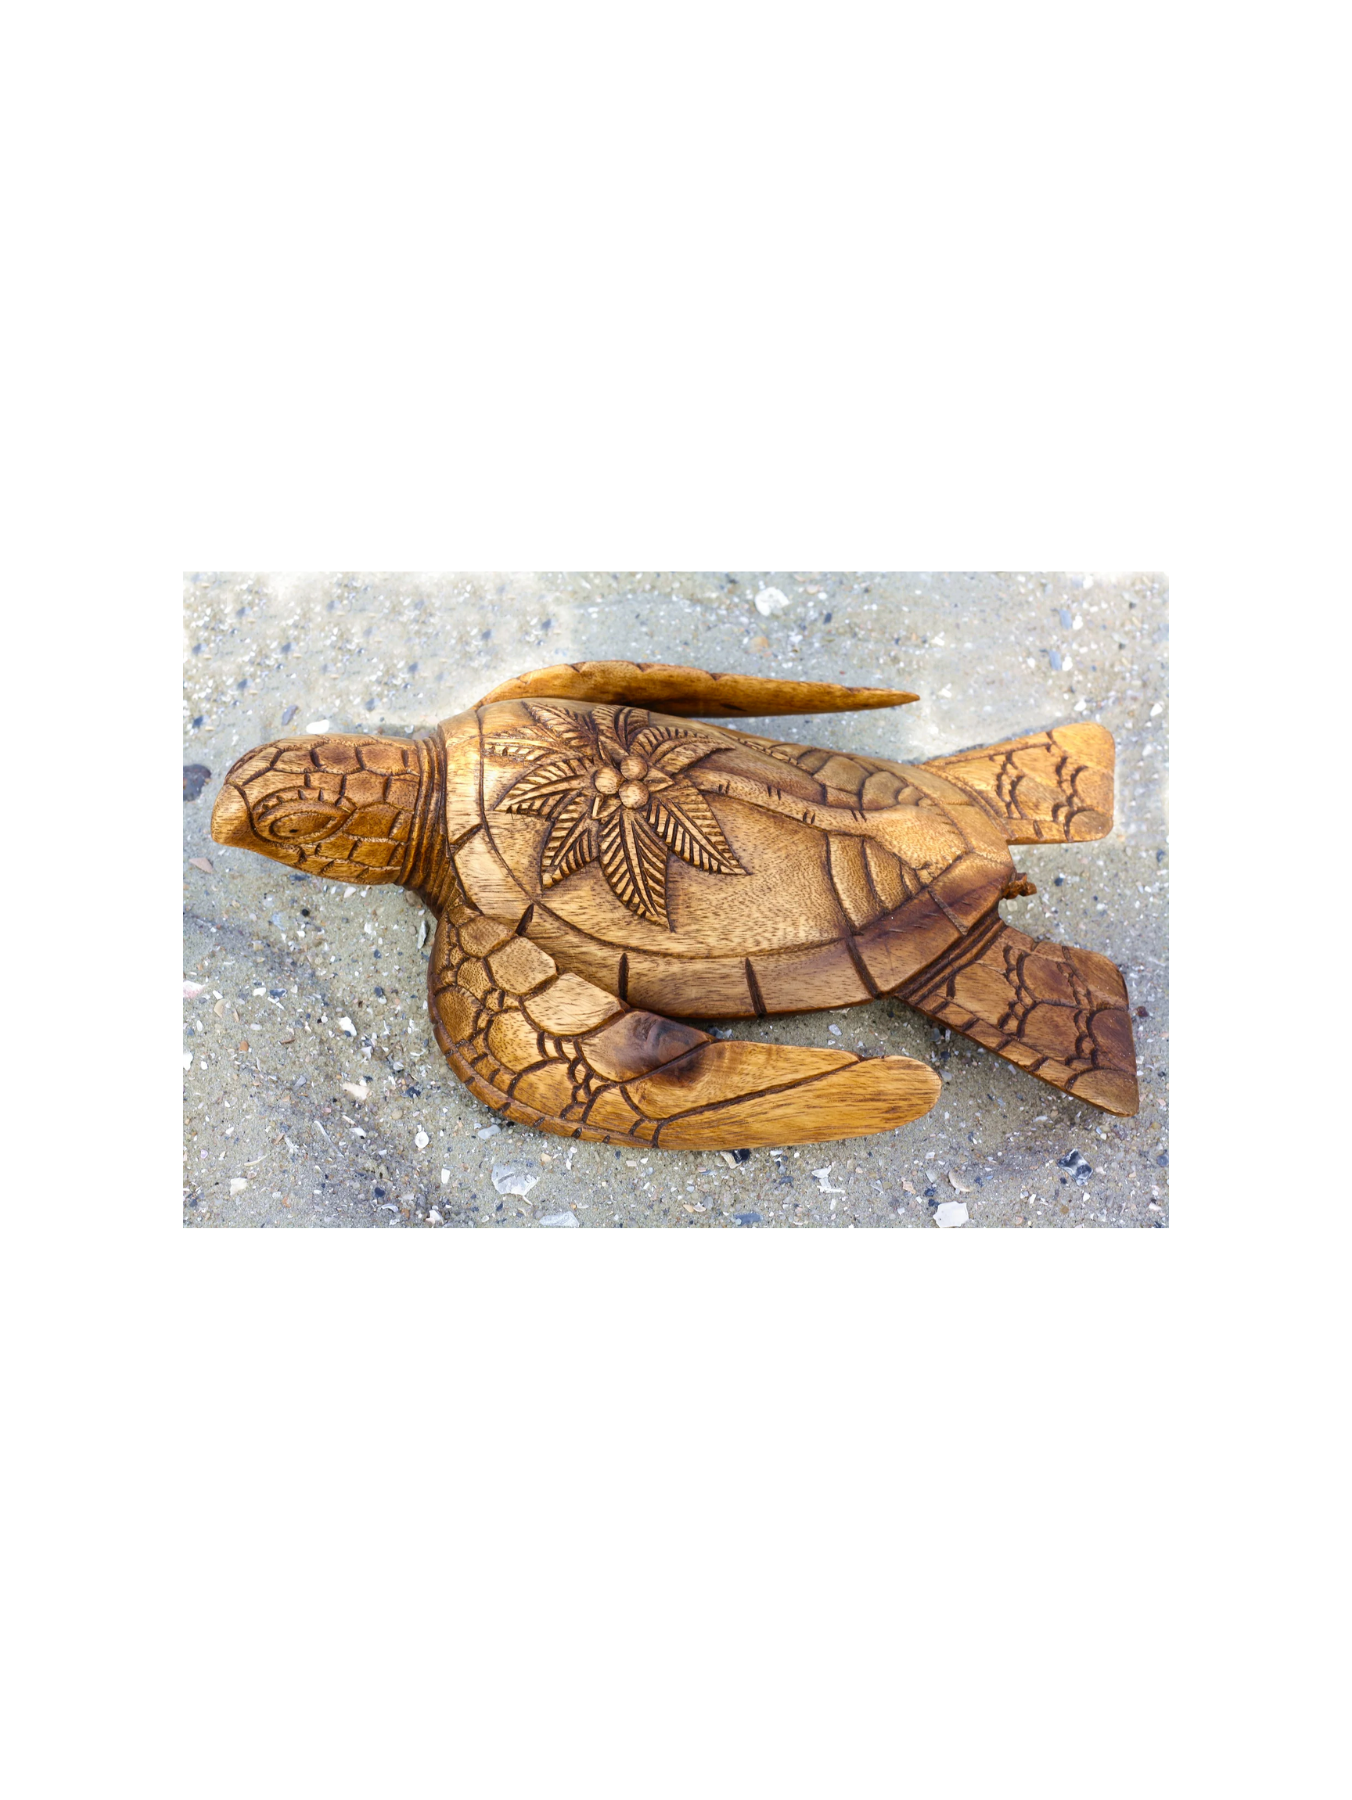 12" Long Wooden Hand Carved Turtle Tortoise Statue Figurine Sculpture Handcrafted Handmade Home Decor Accent Seaside Tropical Nautical Ocean Coastal